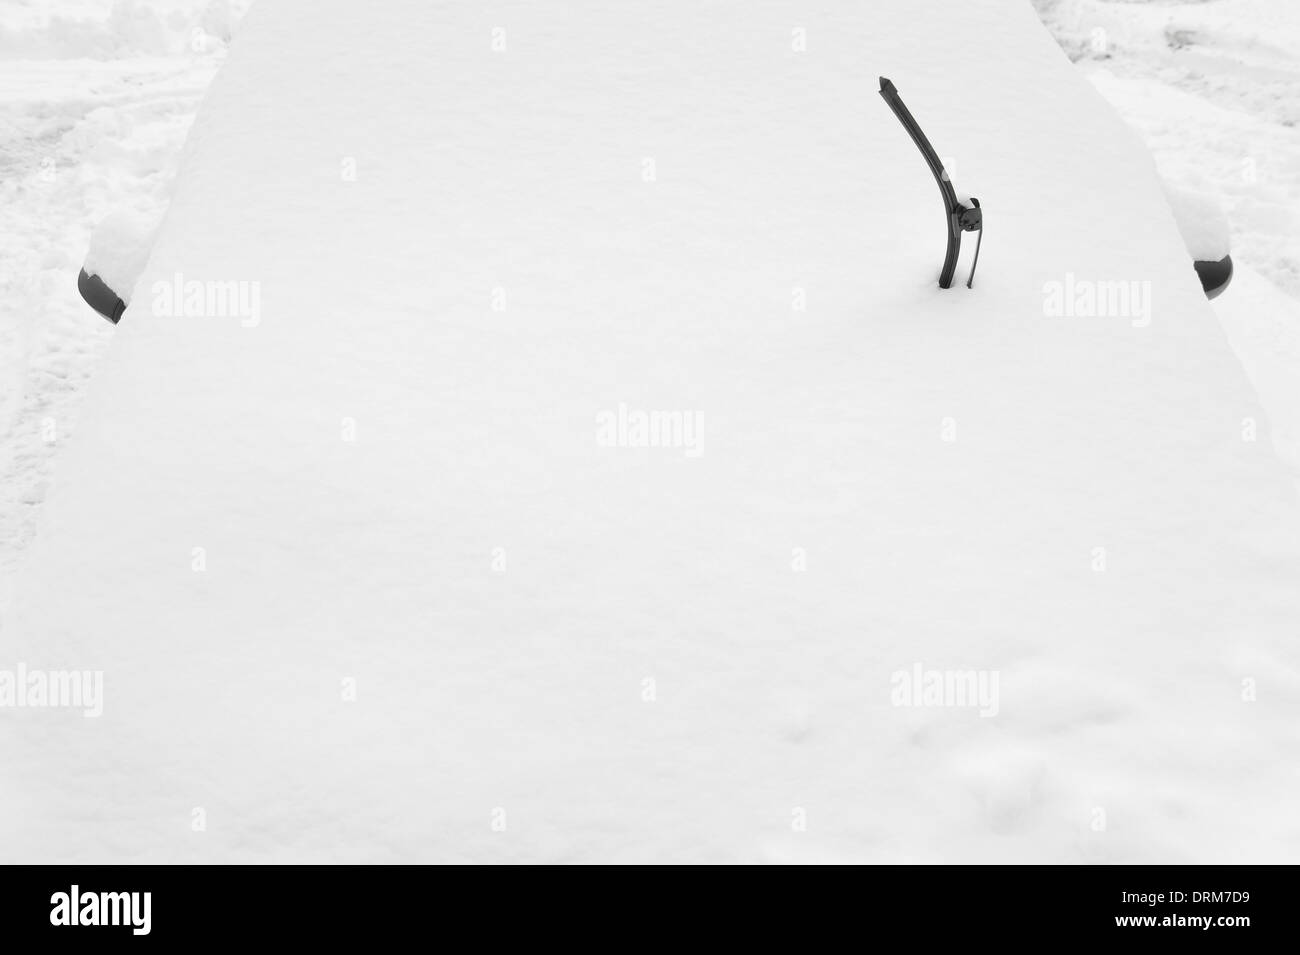 Snow covered car after heavy snowfall Stock Photo